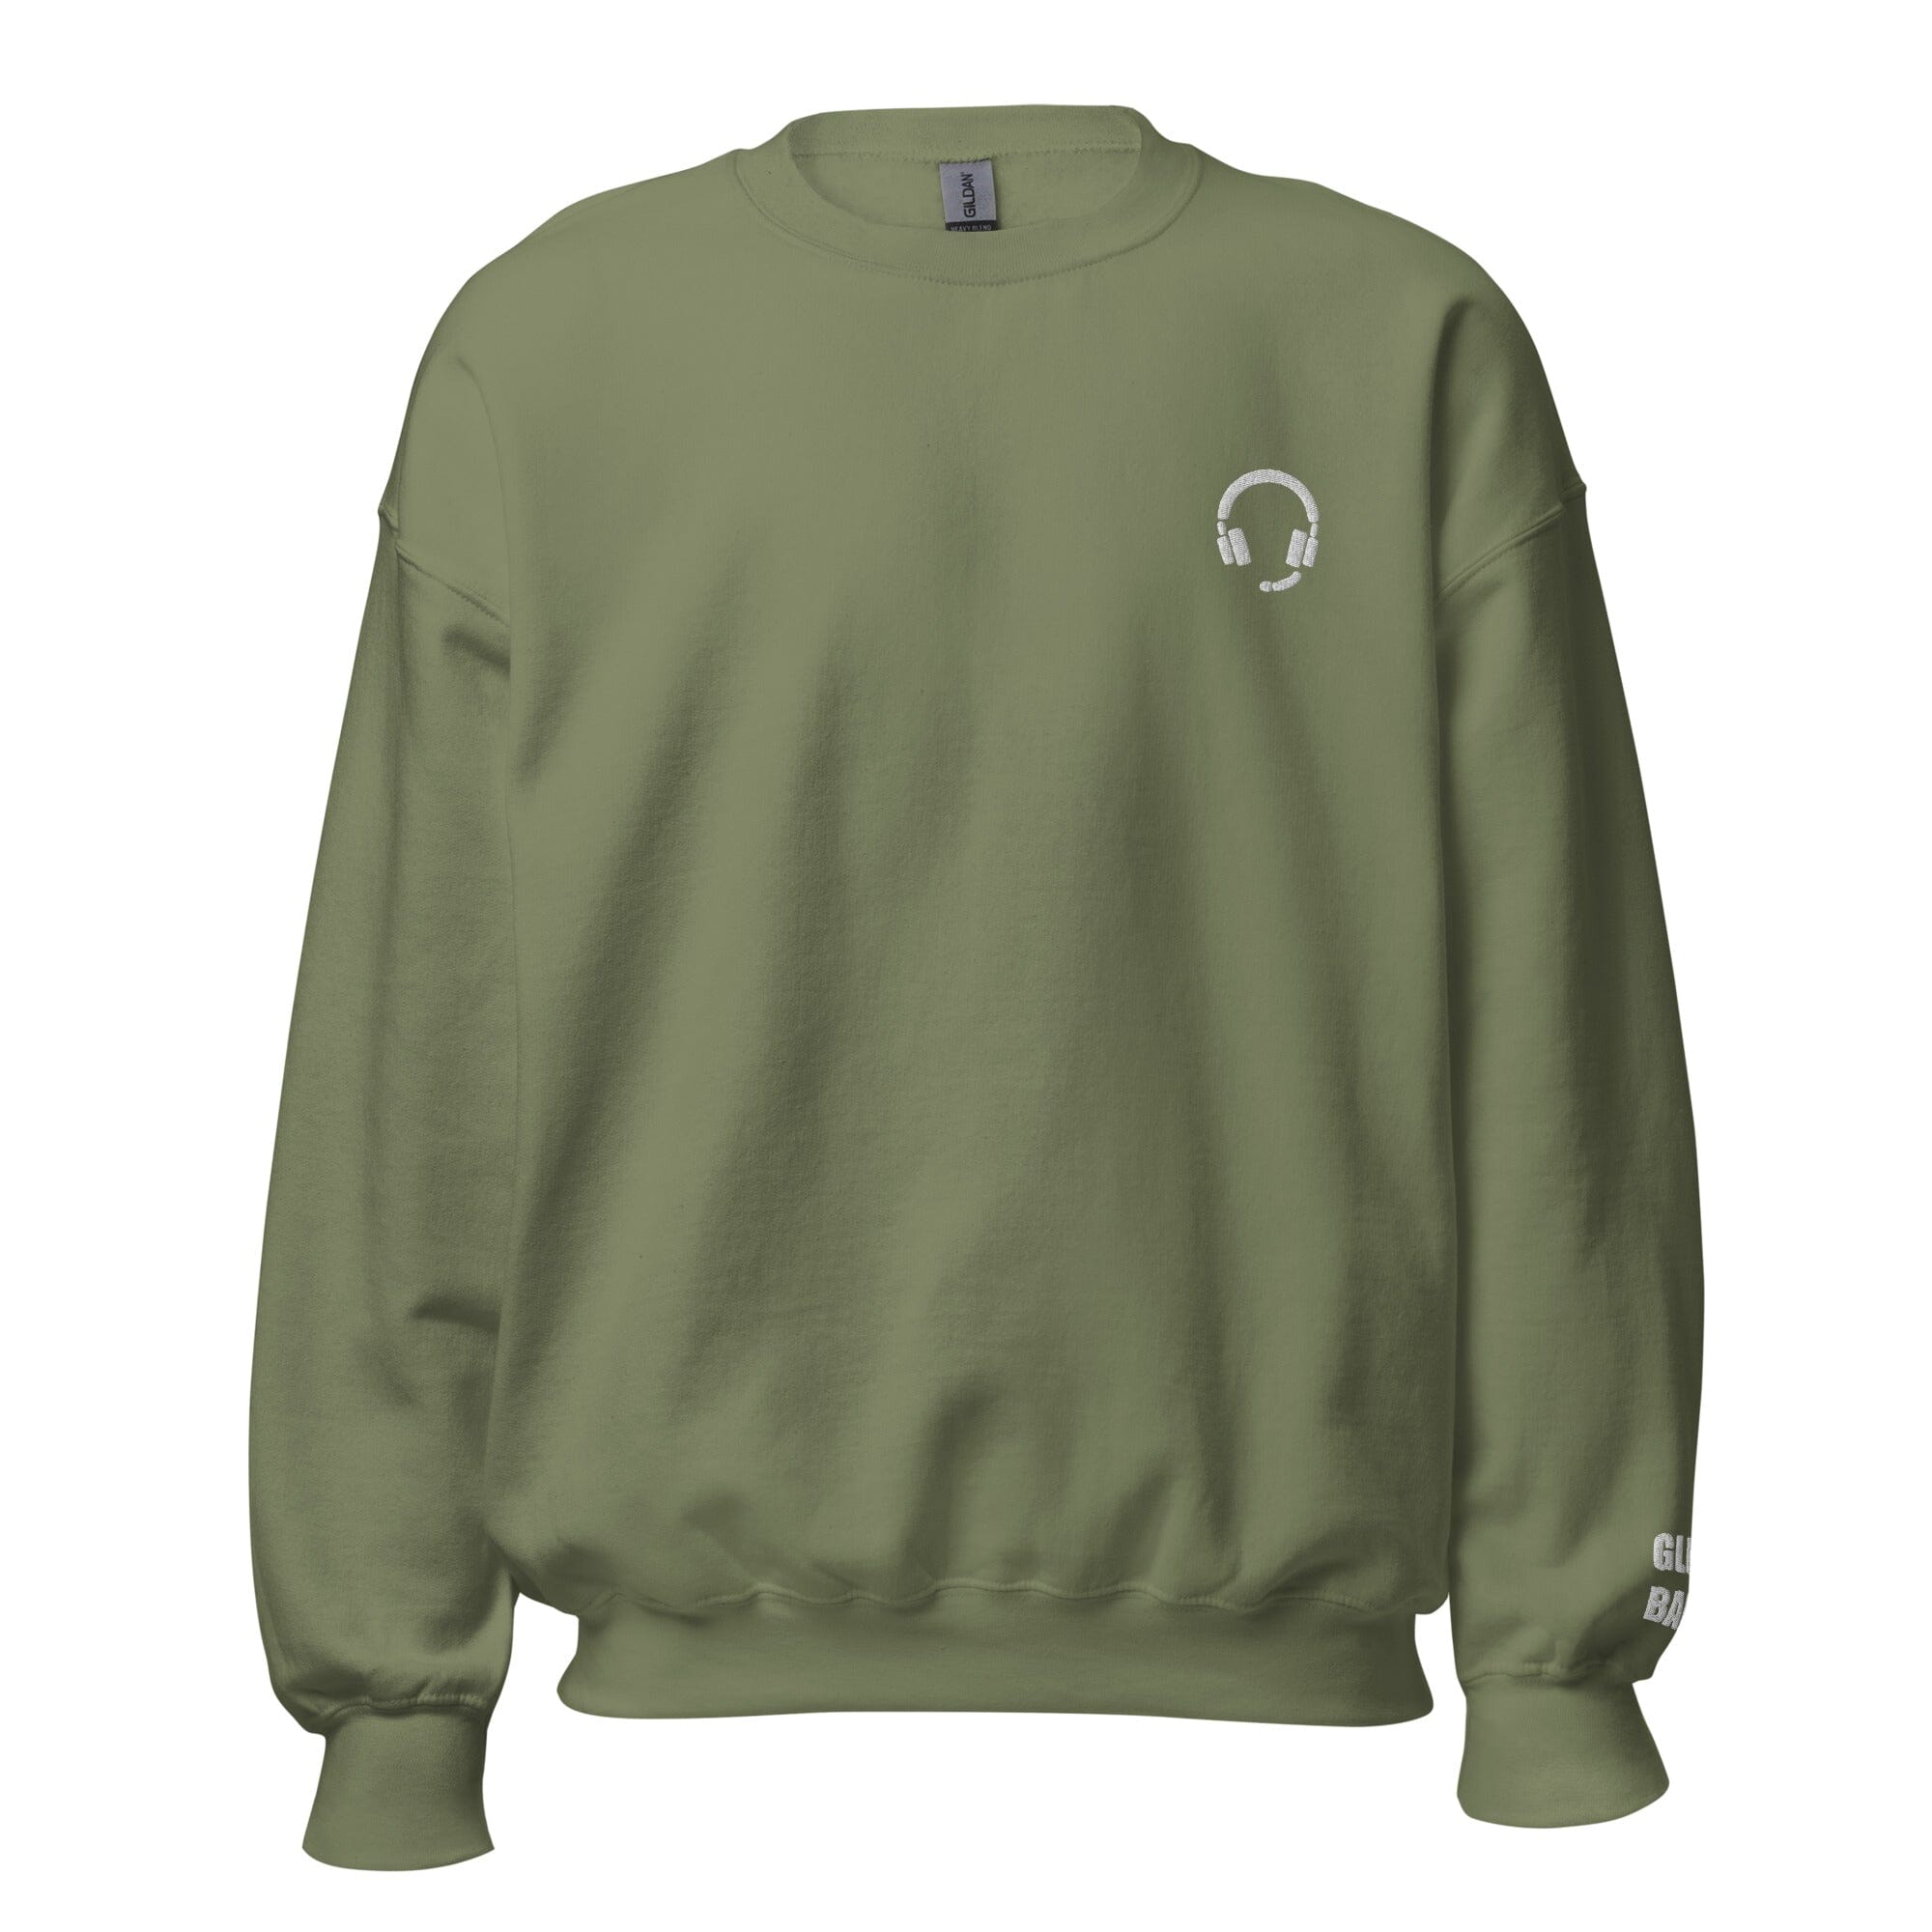 GLHF, Babe | Embroidered Unisex Sweatshirt | Gamer Affirmations Threads & Thistles Inventory Military Green S 